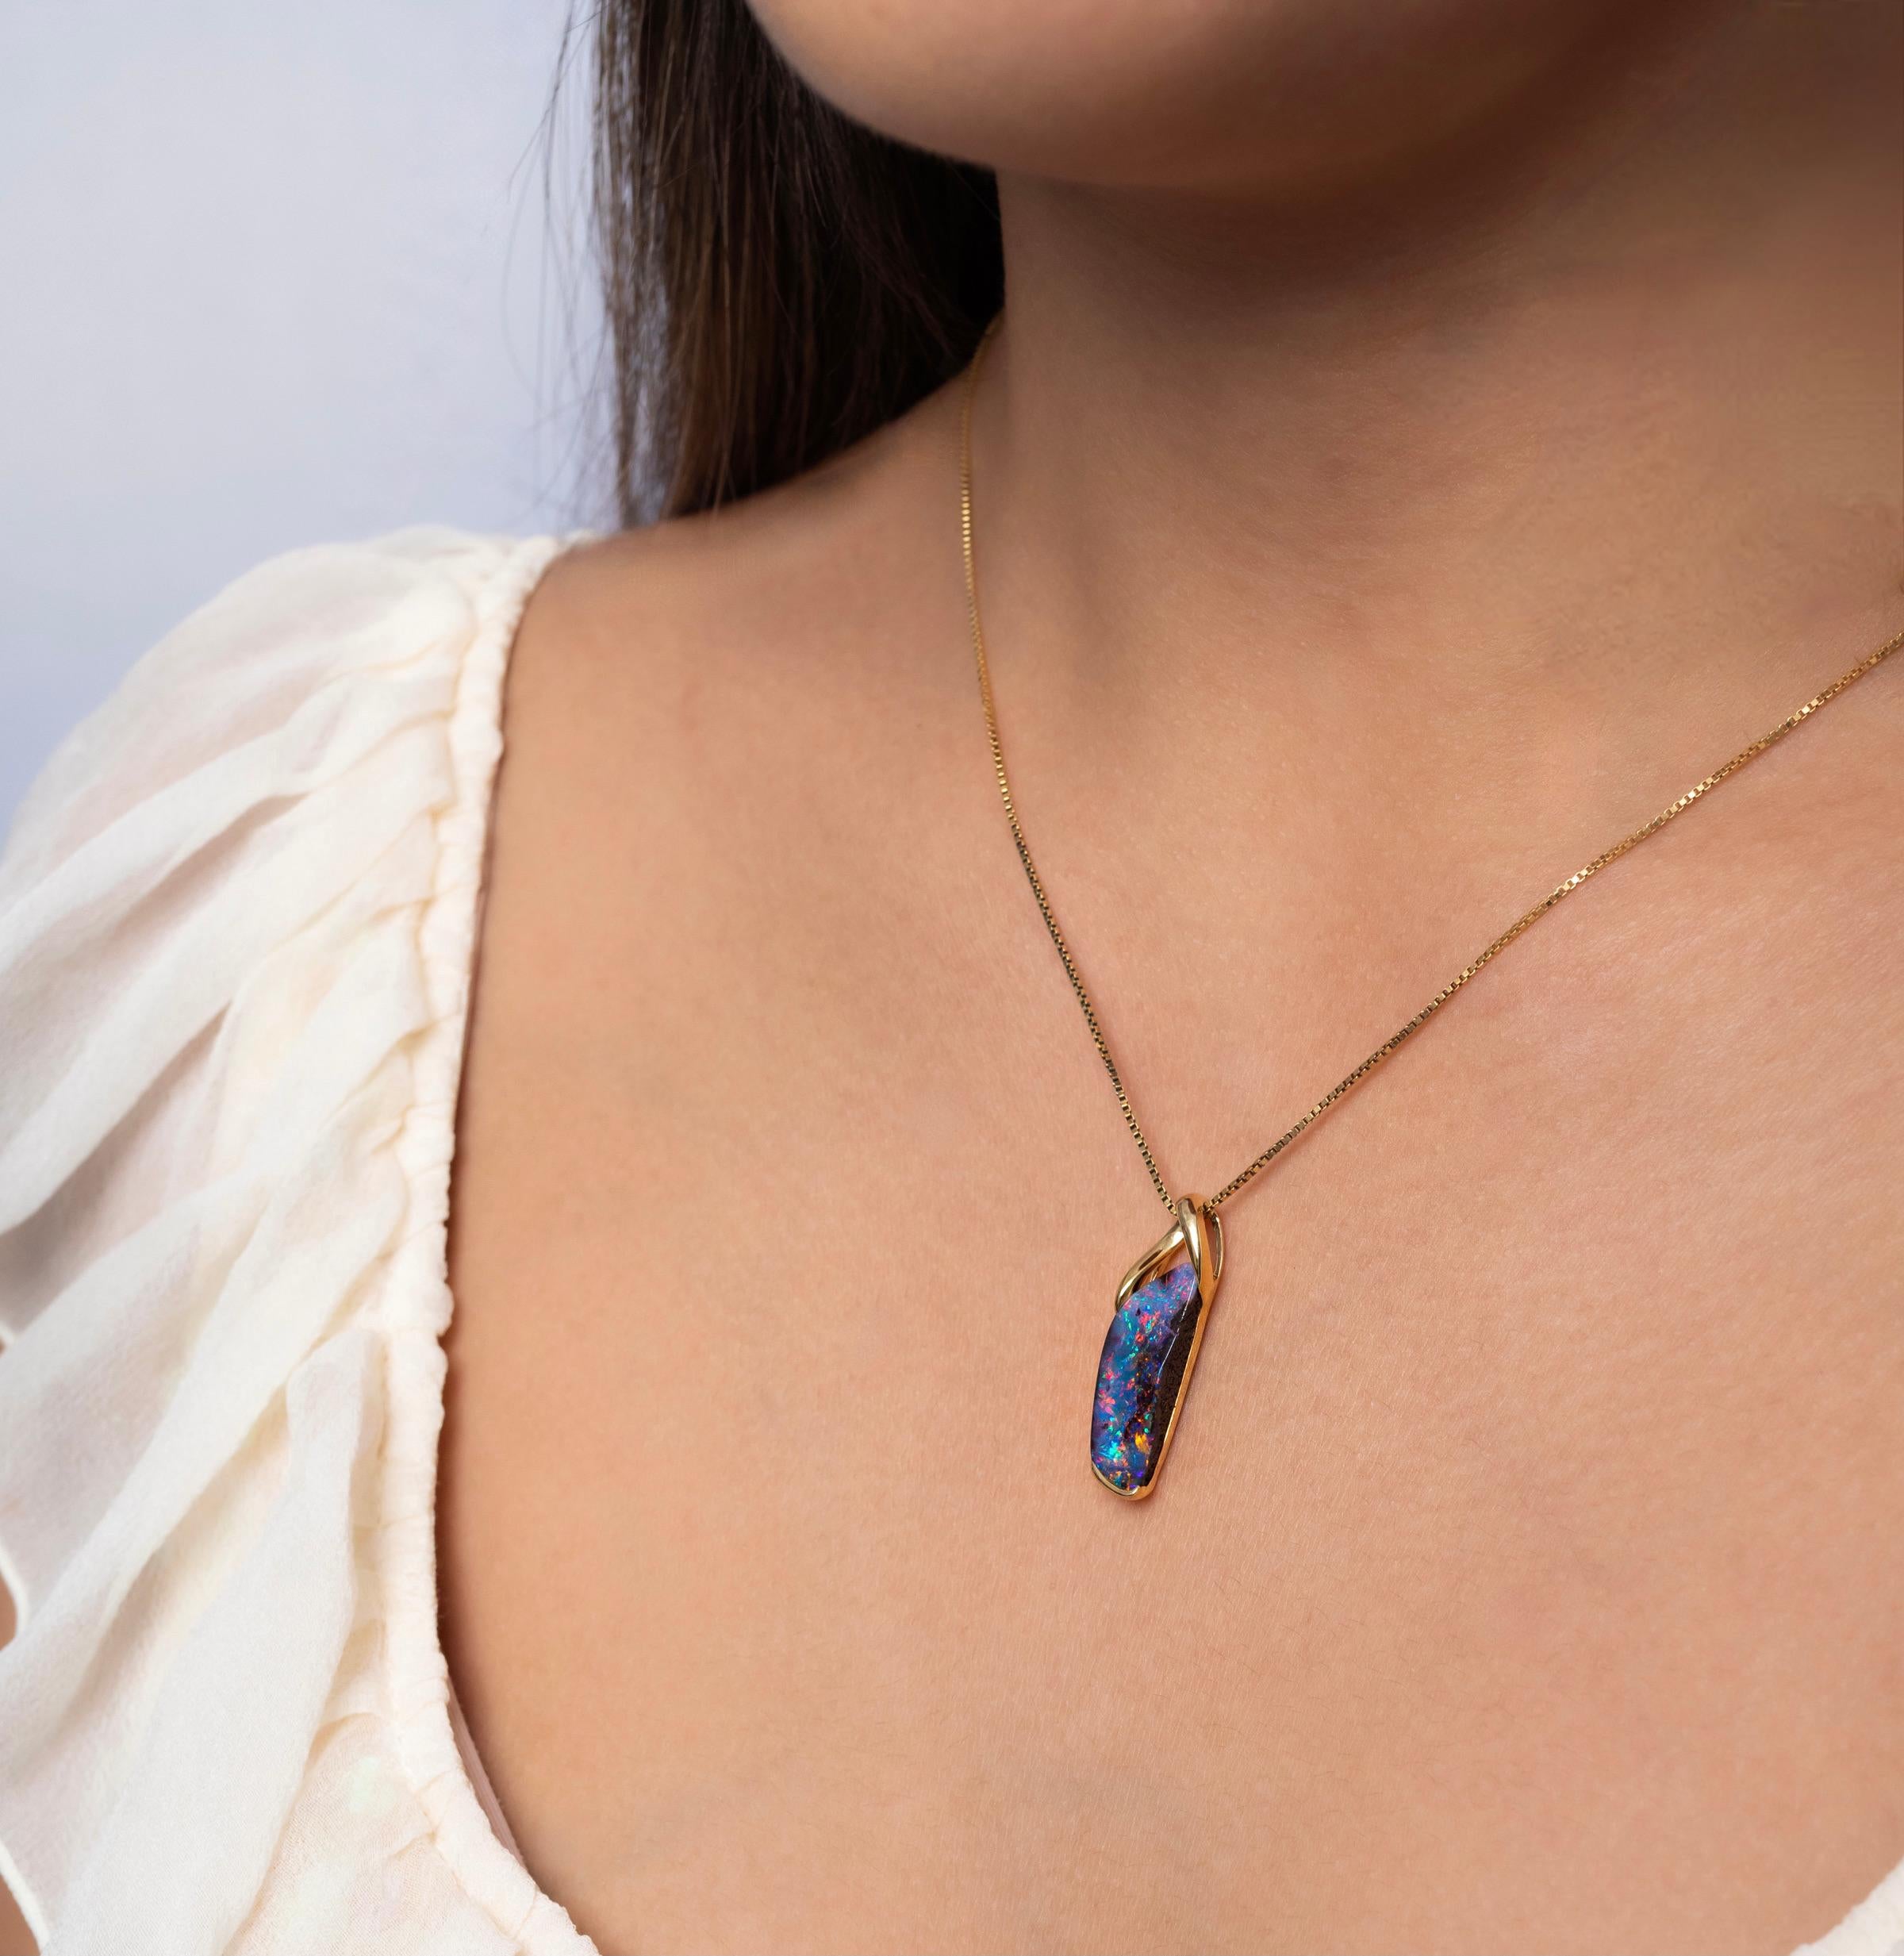 “Splendid Moment” opal pendant shows off a rare and spectacular multicoloured Australian opal (11.73ct) in a simple 18K rose gold setting. This versatile piece is designed to accommodate thicker omega and snake chains. Handcrafted to perfection,